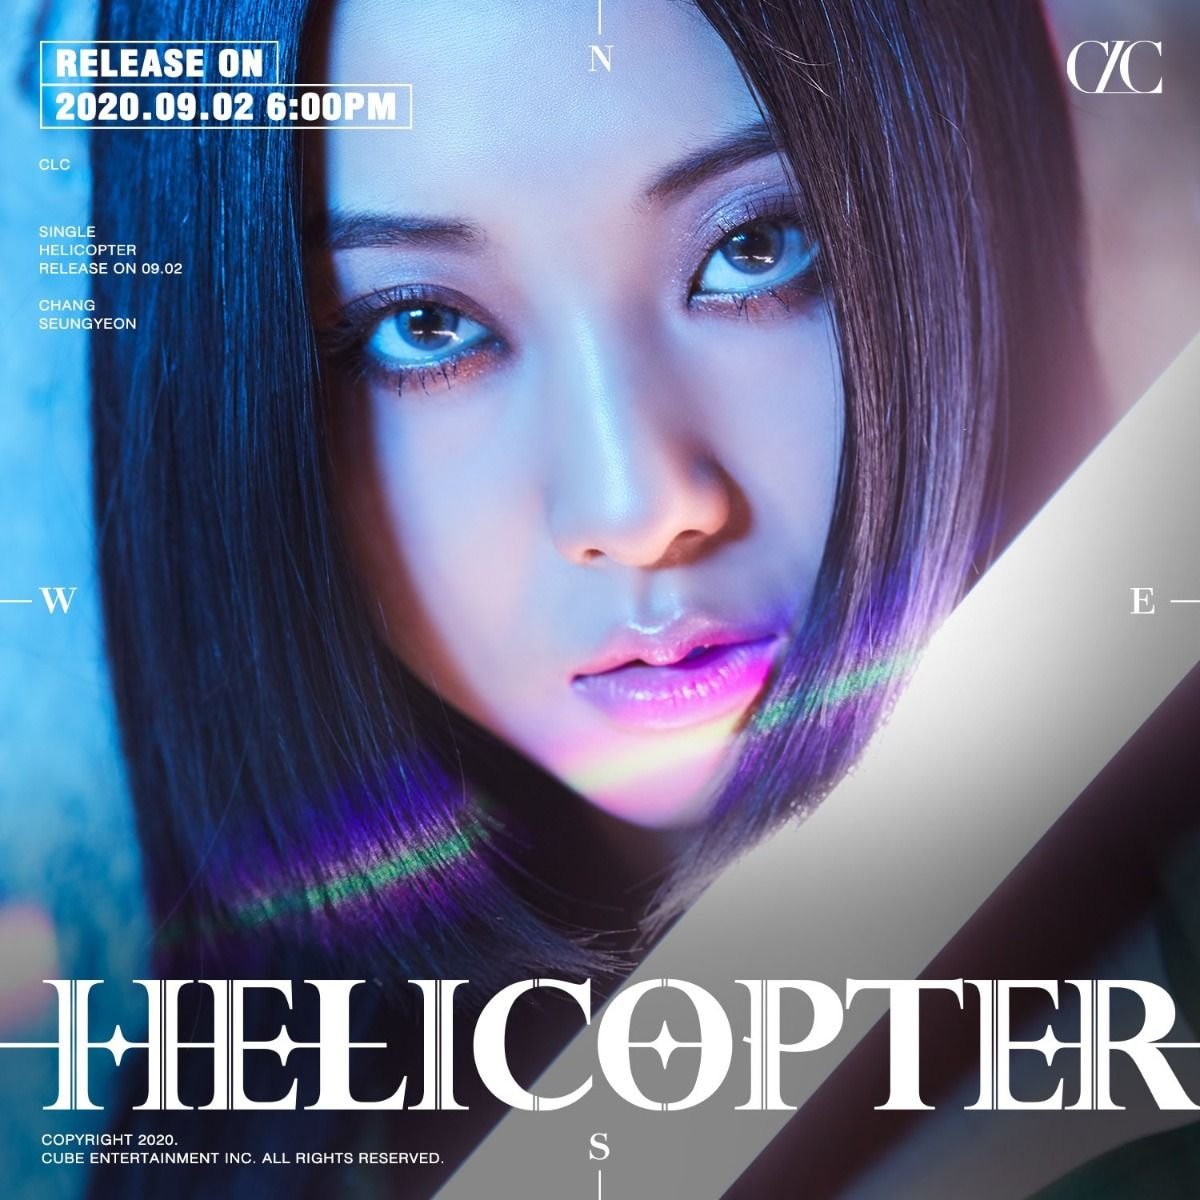 CLC (씨엘씨) Single [HELICOPTER] Concept Image #1